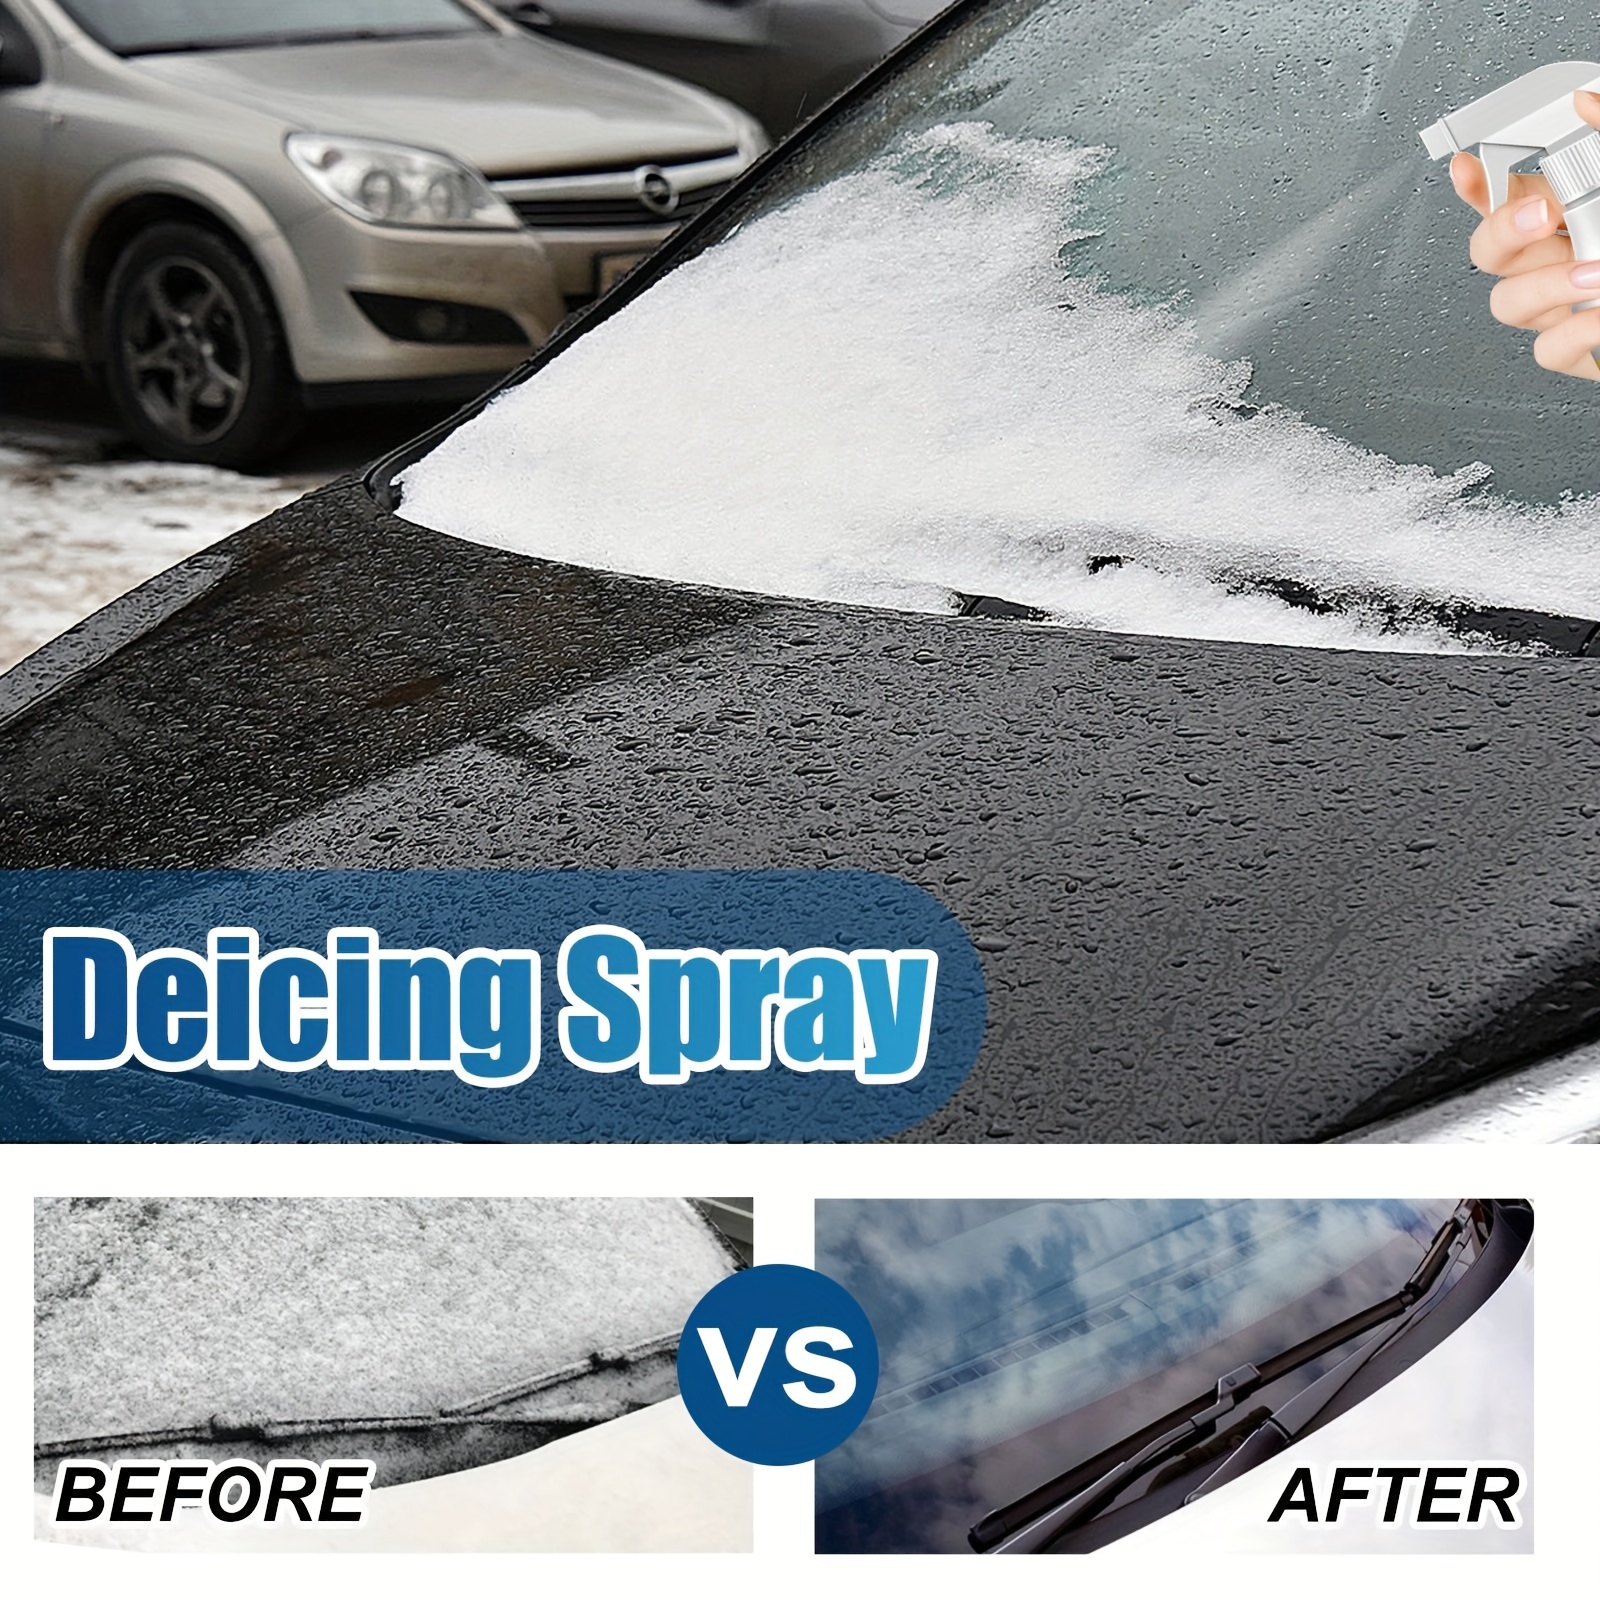 Car Windshield Deicer Defroster Ice Remover Spray Fast Snow Melting Agent  60ml